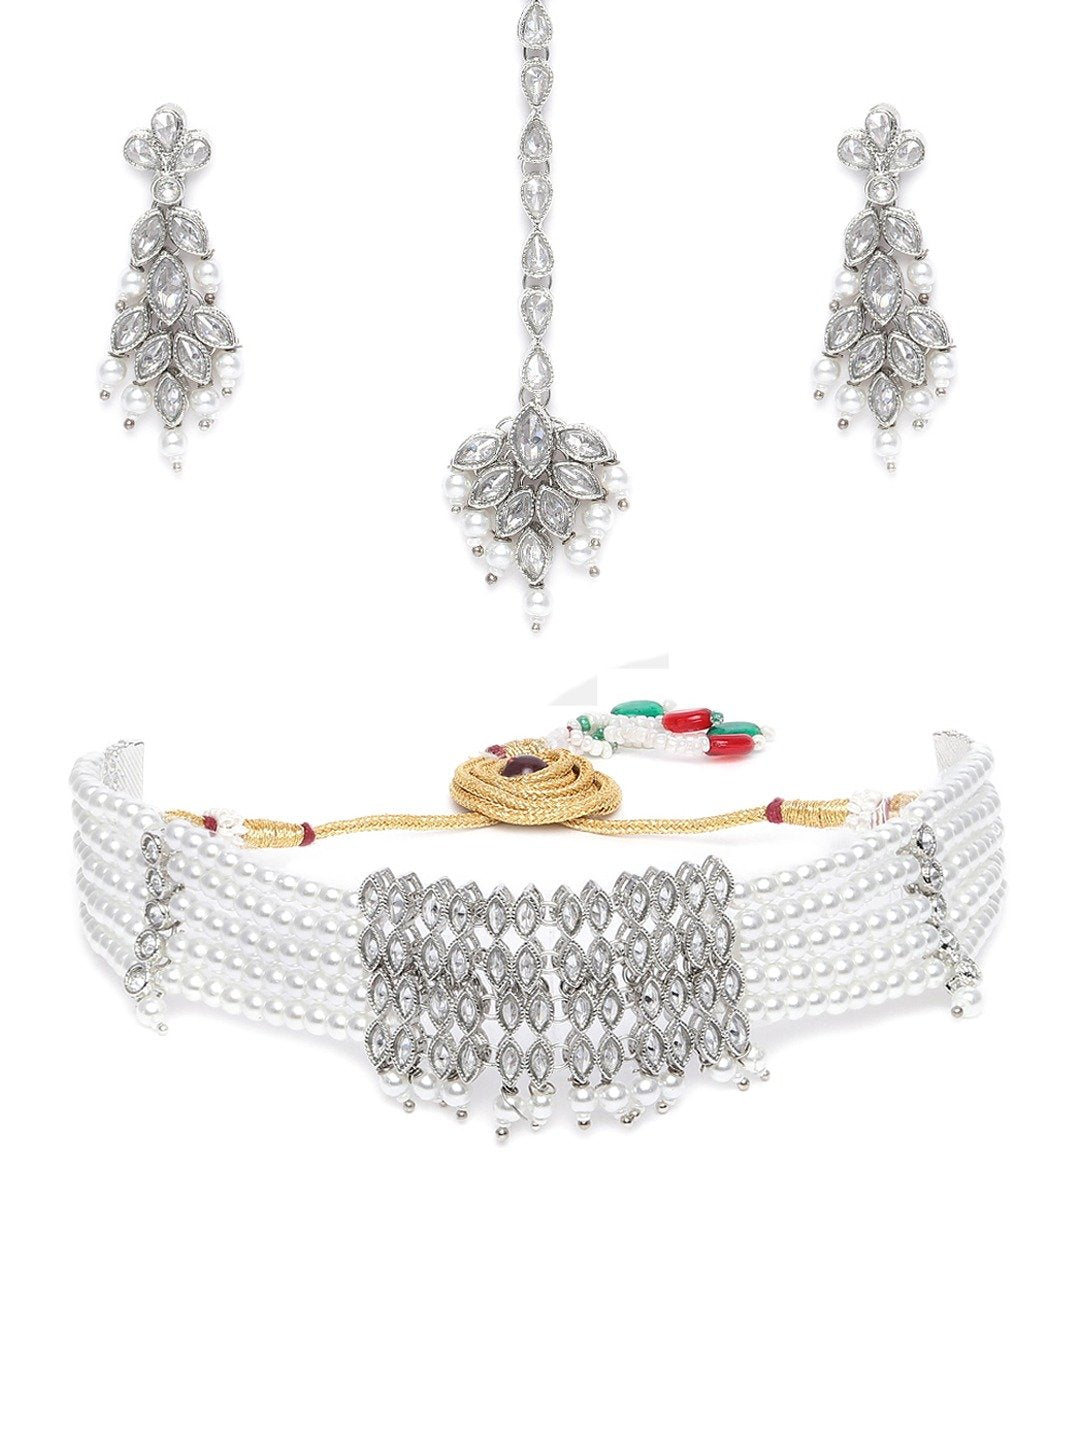 Women's Silver Plated White Crystal Beads with Stone Studded Choker Necklace Set - i jewels